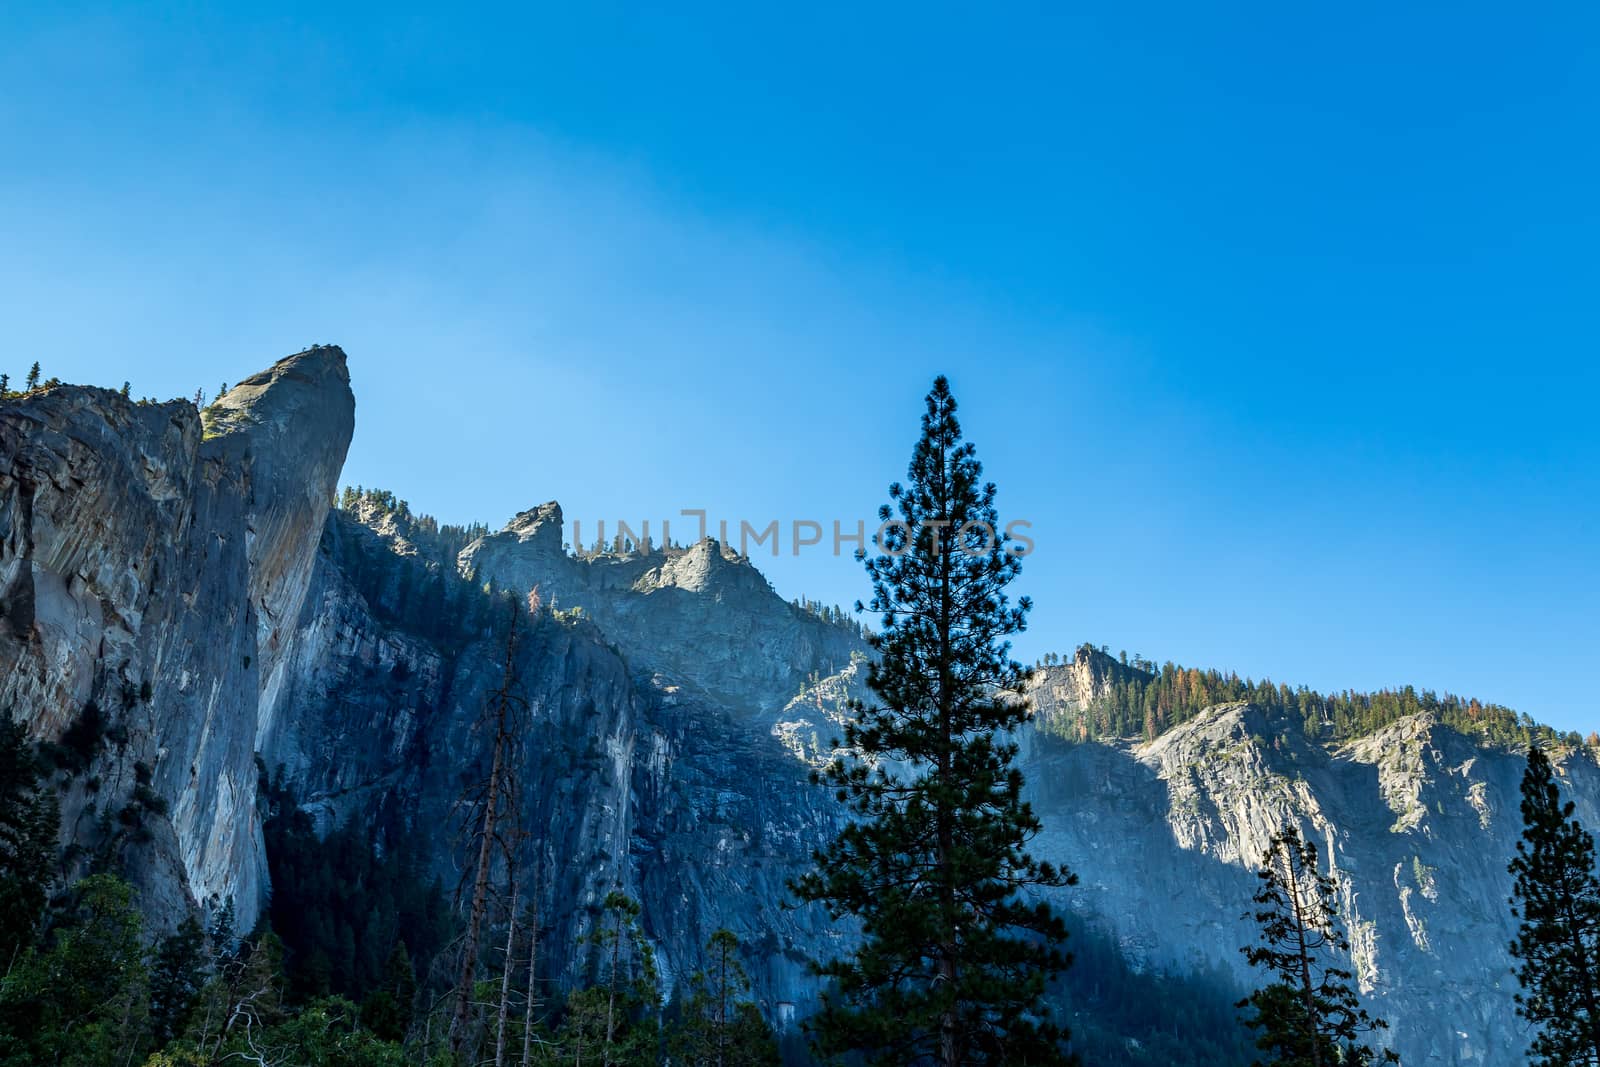 The Leaning Tower in Yosemite National Park is a popular destination for rock climbers. It is located west of, and adjacent to Bridalveil Fall, on the south side of the Merced River in Yosemite Valley. The rock is considered to be a strenuous climb, requiring approximately three days to climb to the summit. It is said to be a 700-foot (210 m) climb.